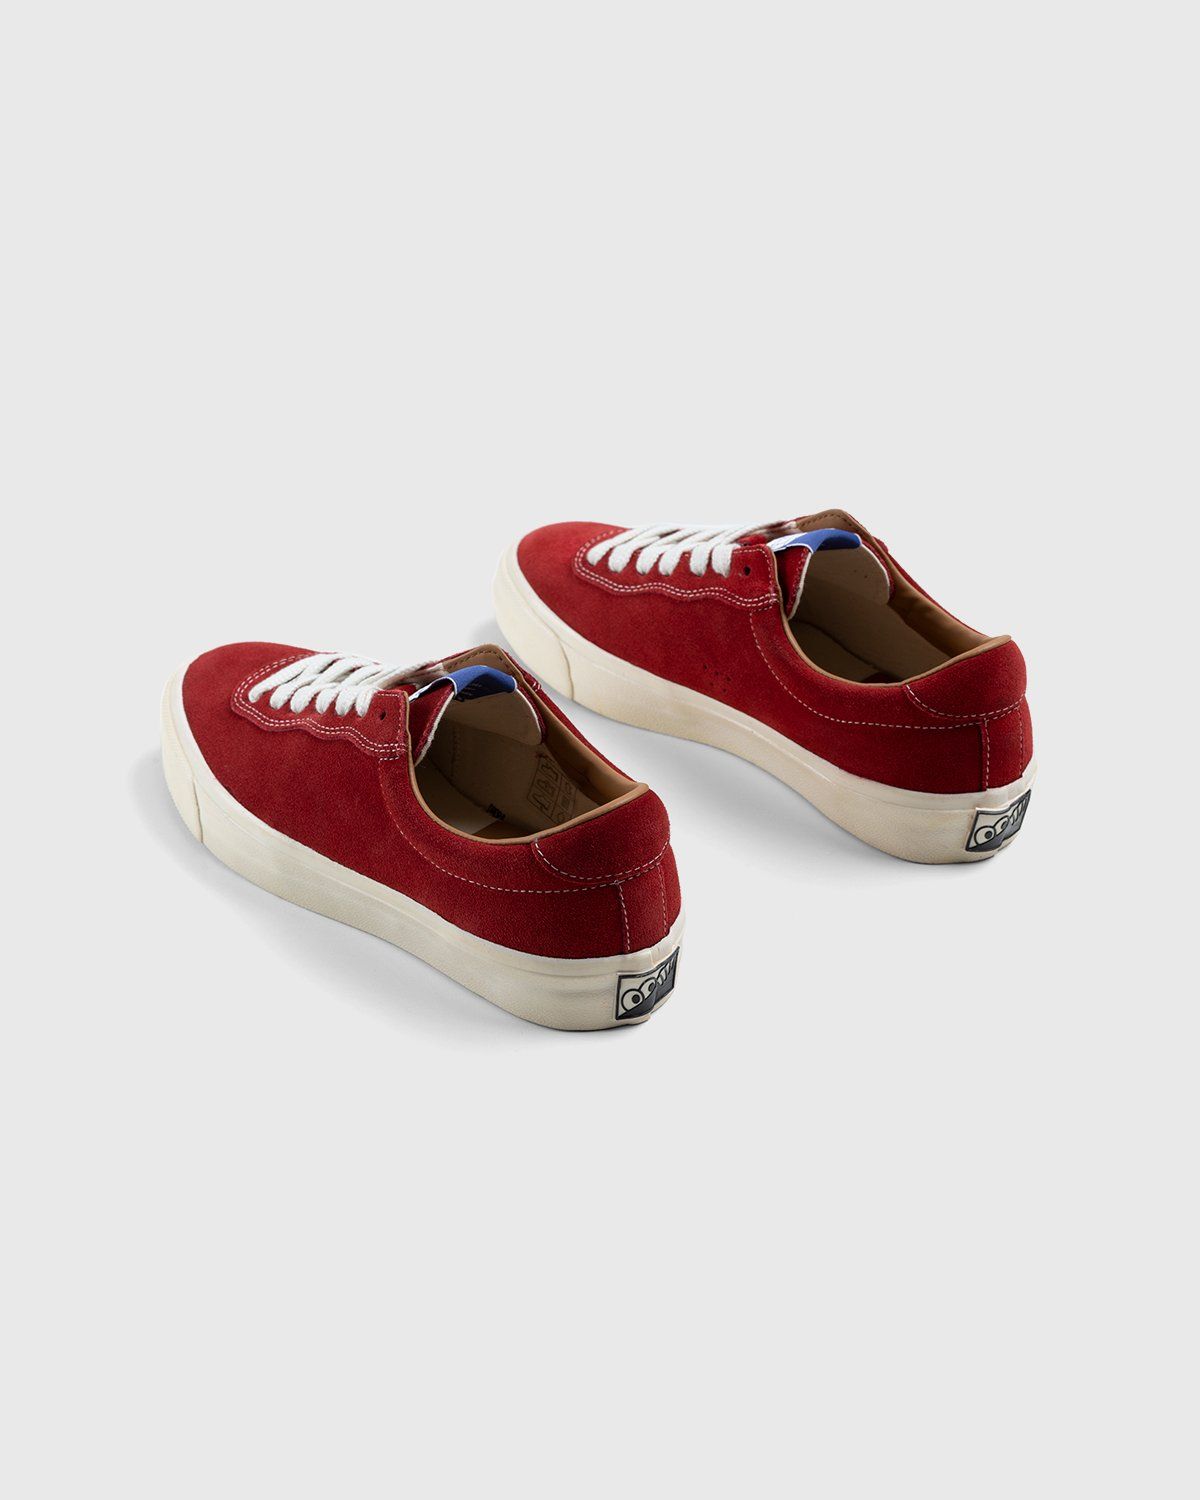 Last Resort AB – VM001 Lo Suede Old Red/White - Image 4